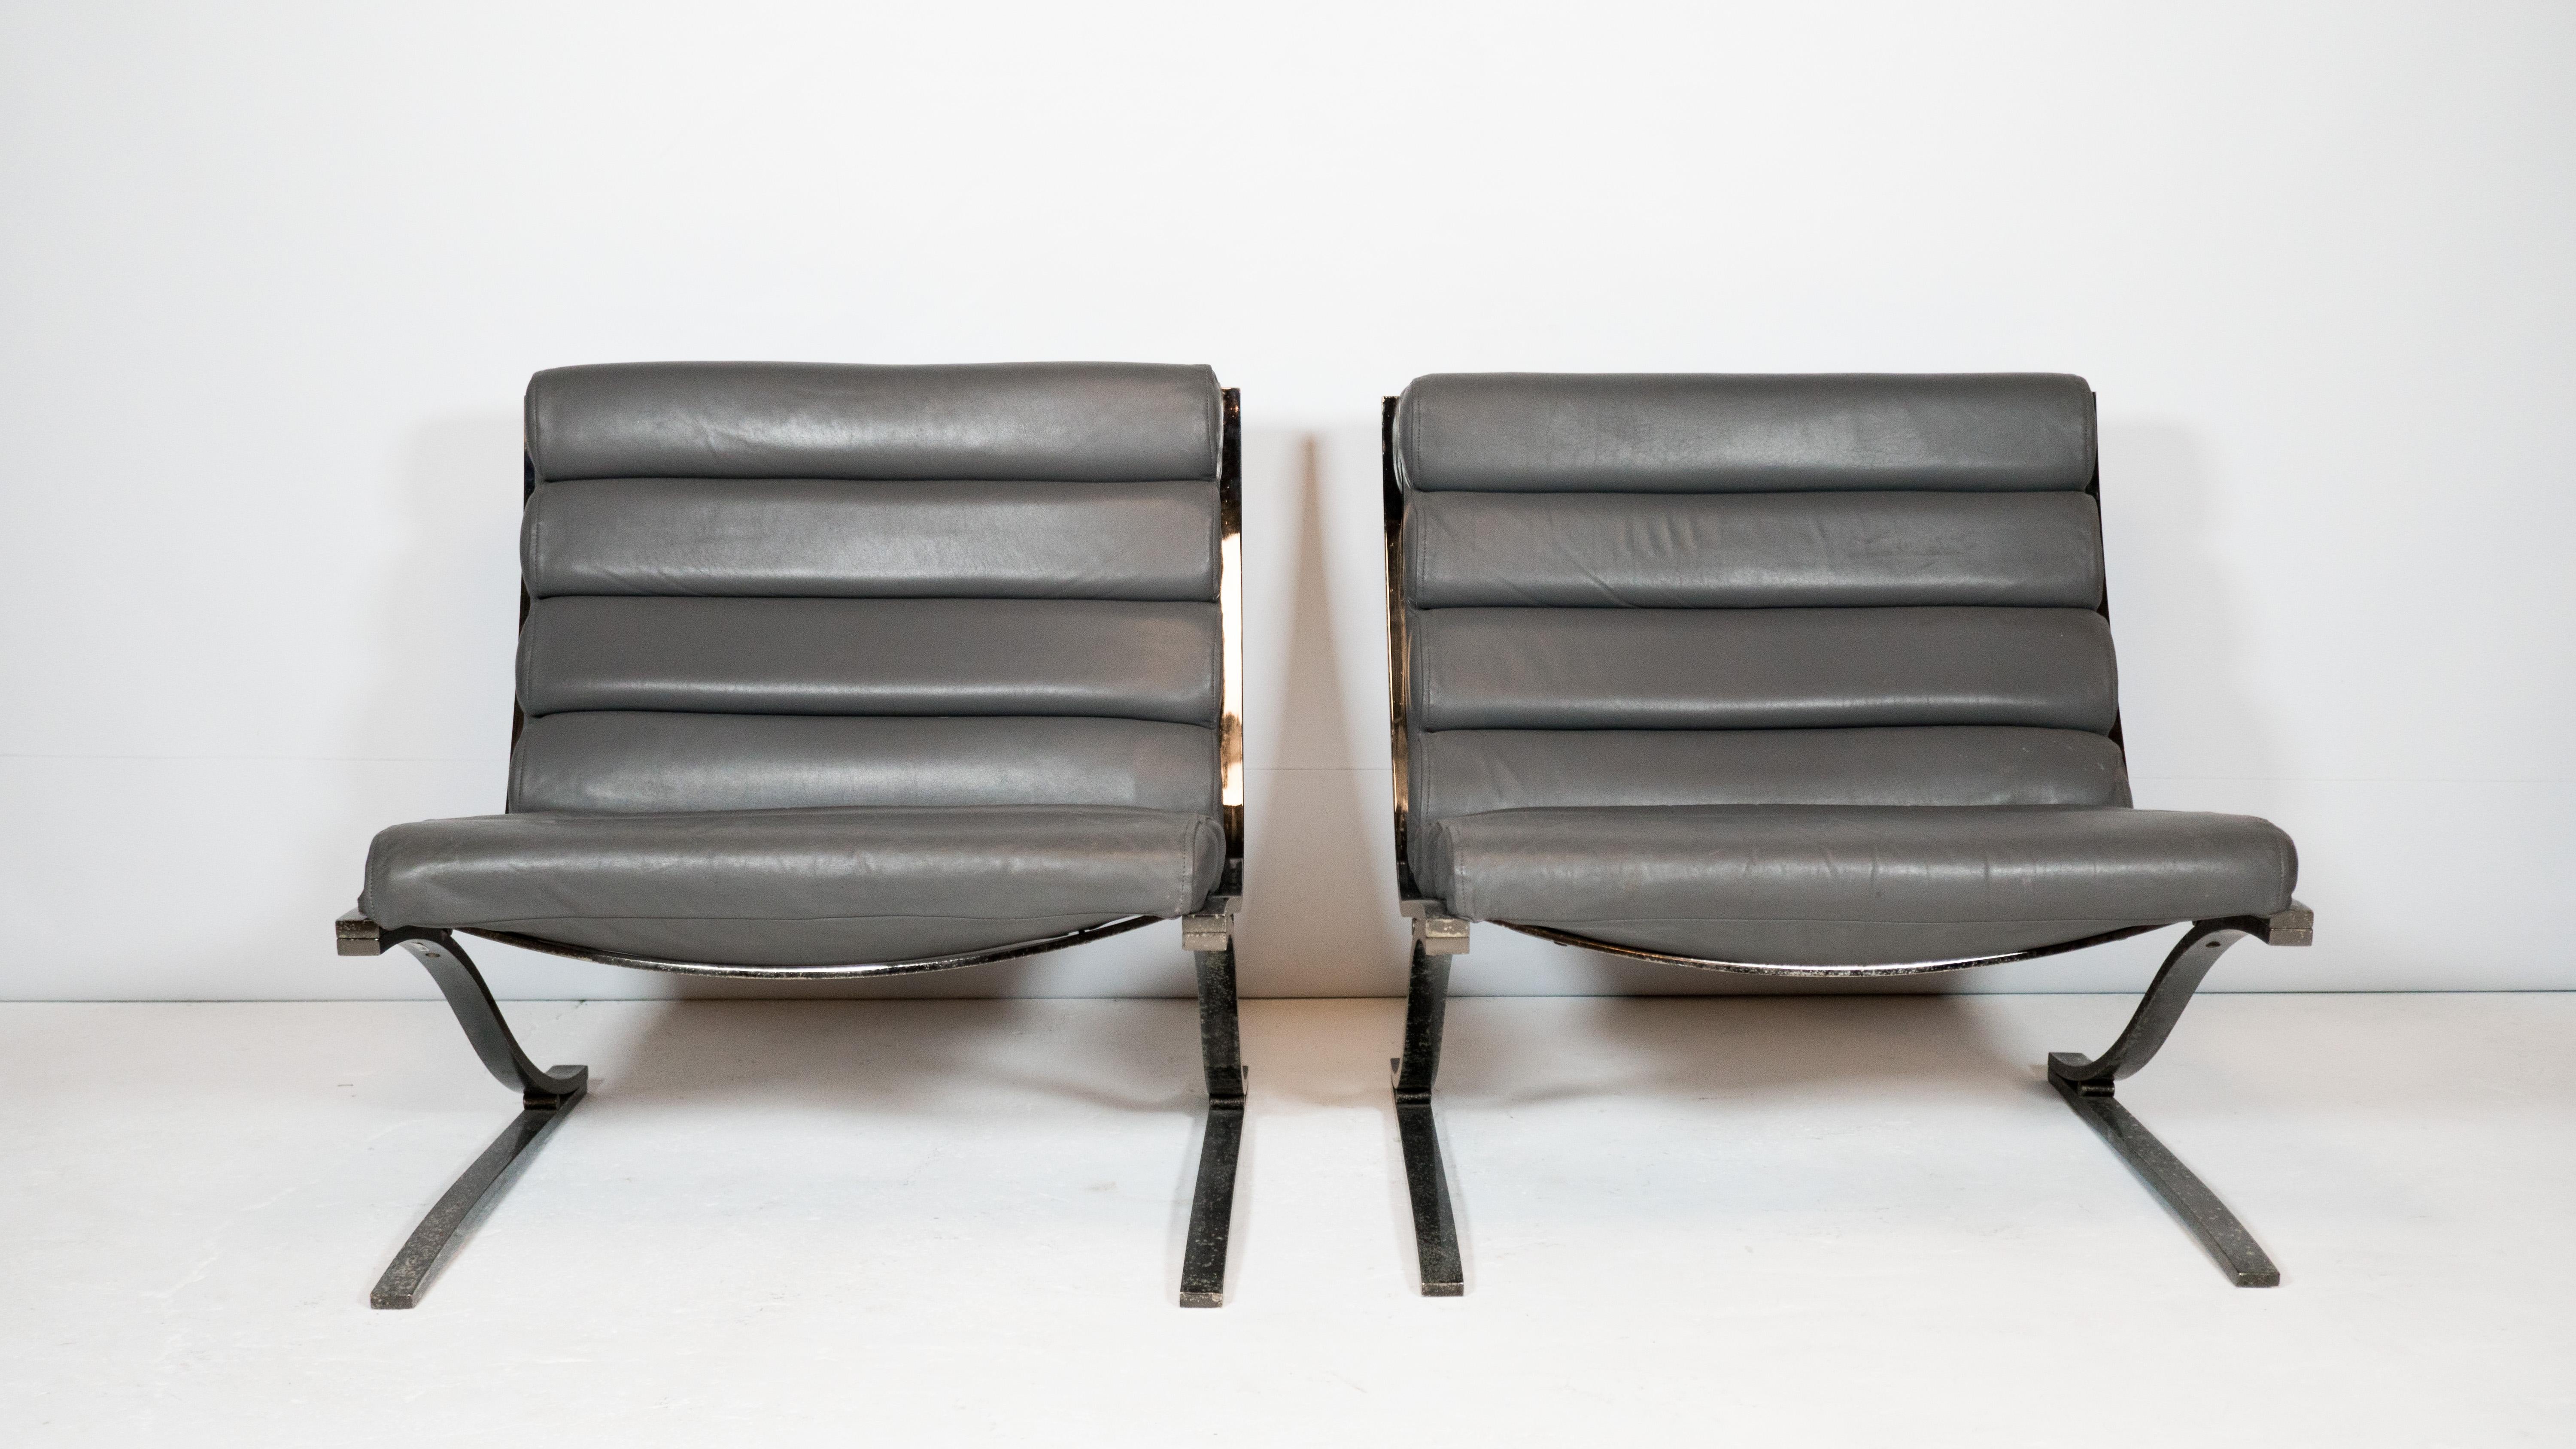 1980s Post Modern Design Institute of America Chrome Lounge Chairs & Ottoman  In Good Condition For Sale In Boston, MA